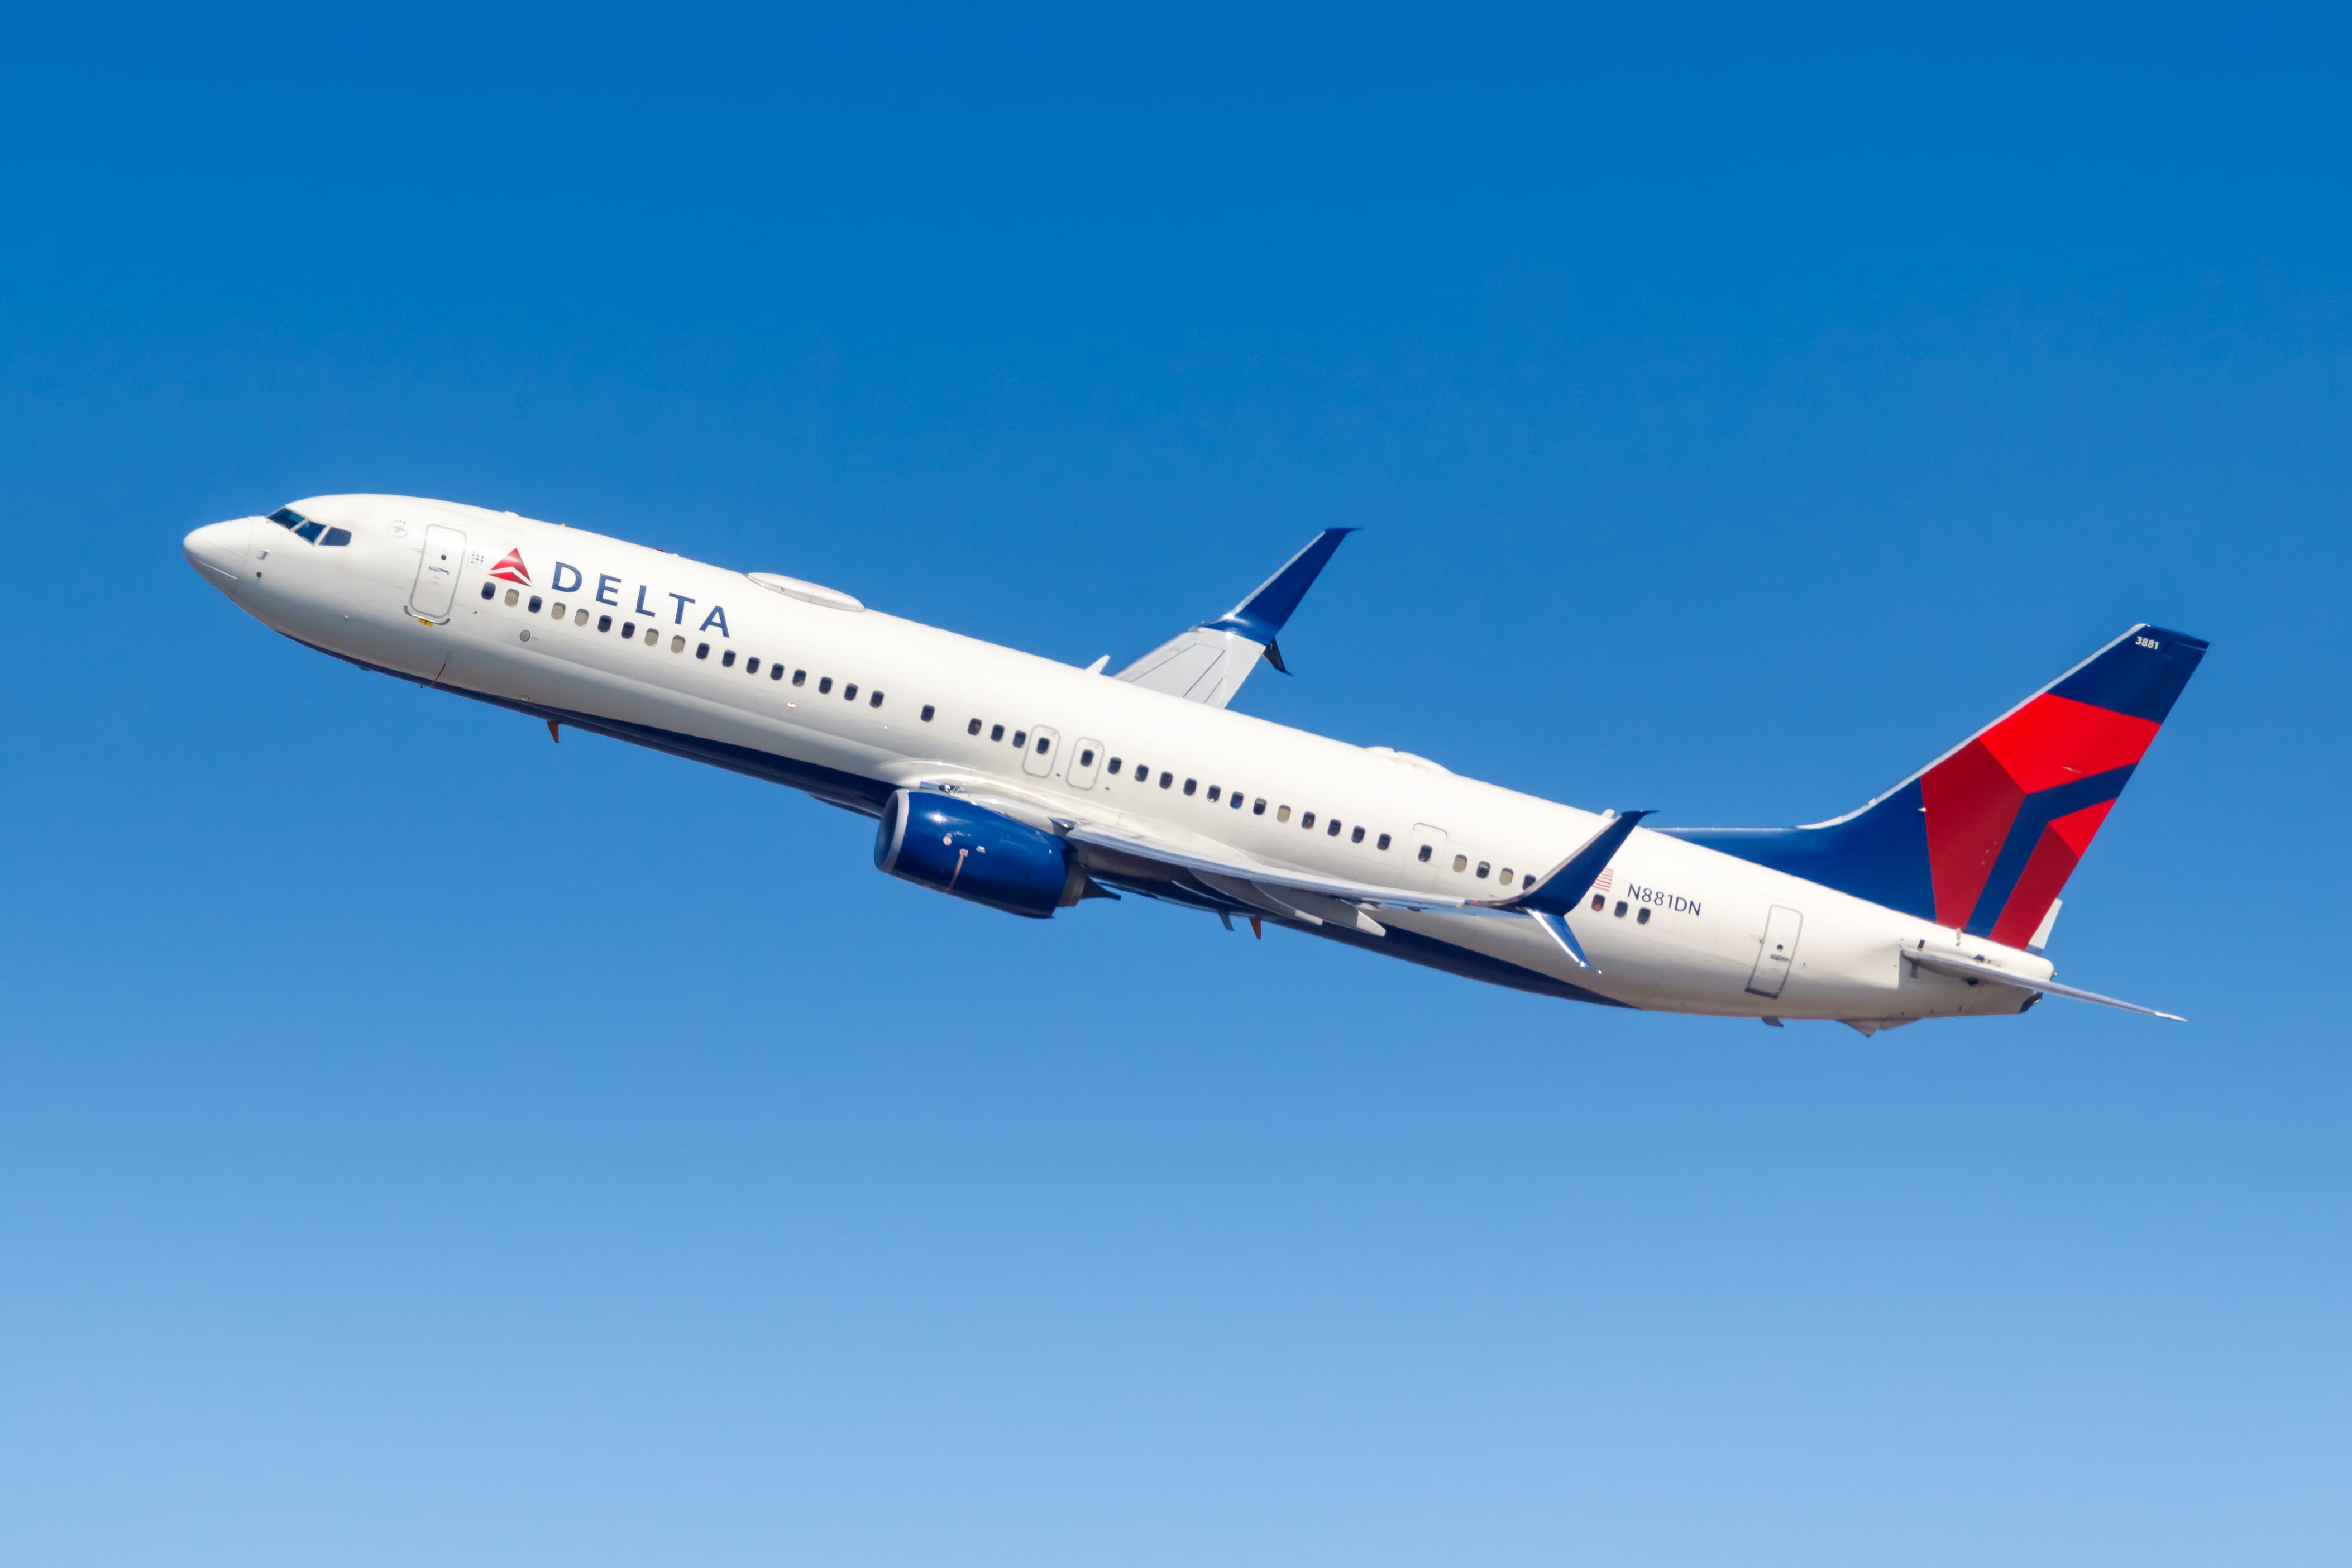 A Delta Air Lines Boeing 737-900ER taking off